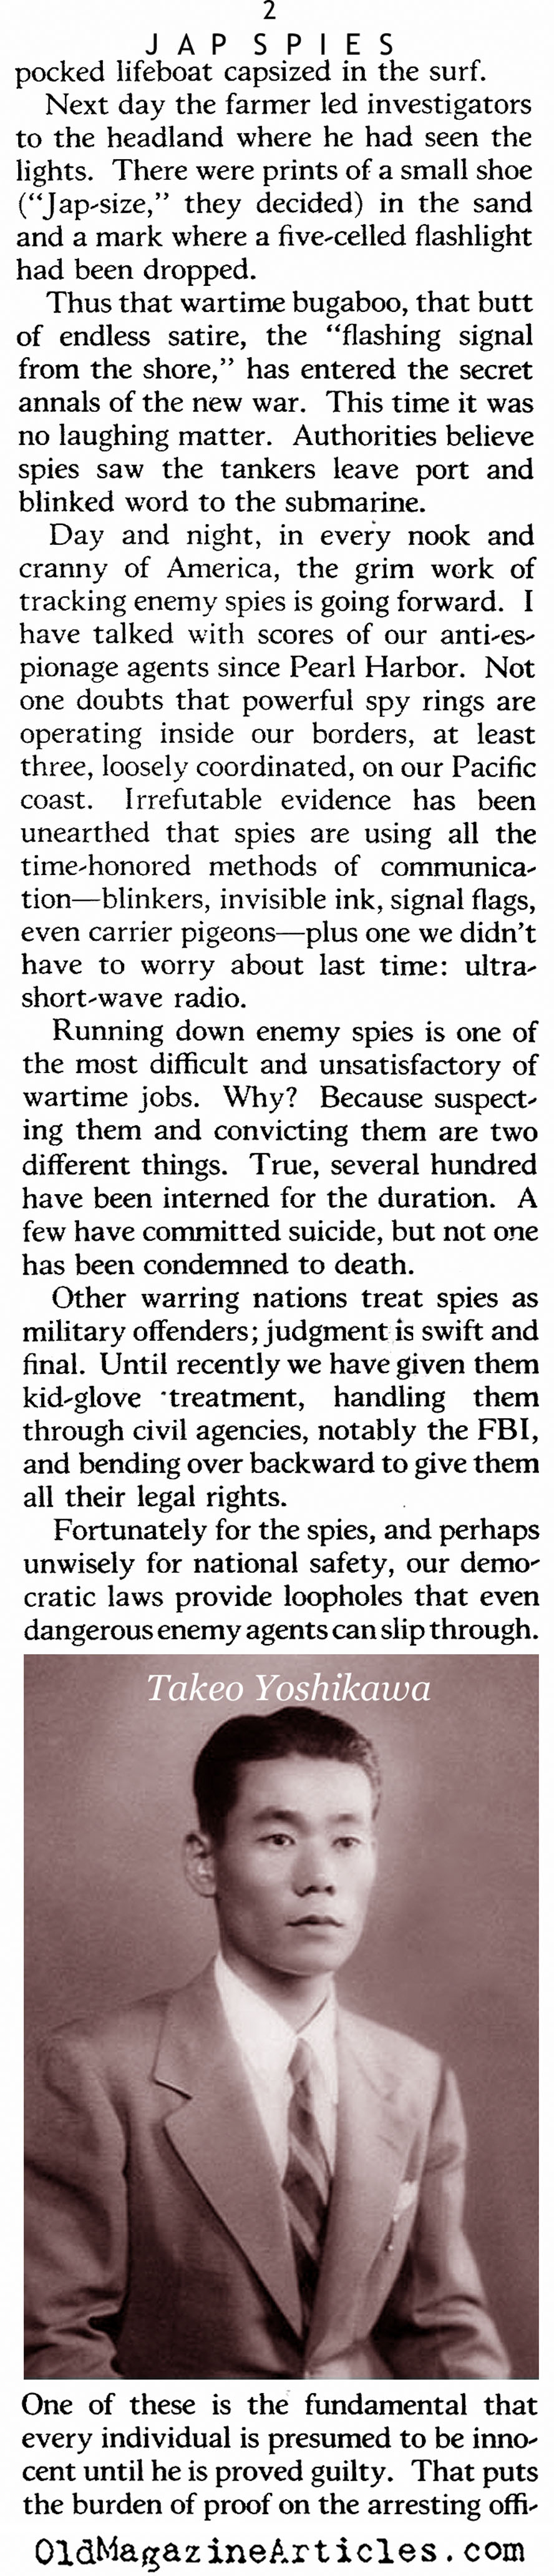 Finding Japanese Spies (The American Magazine, 1942)